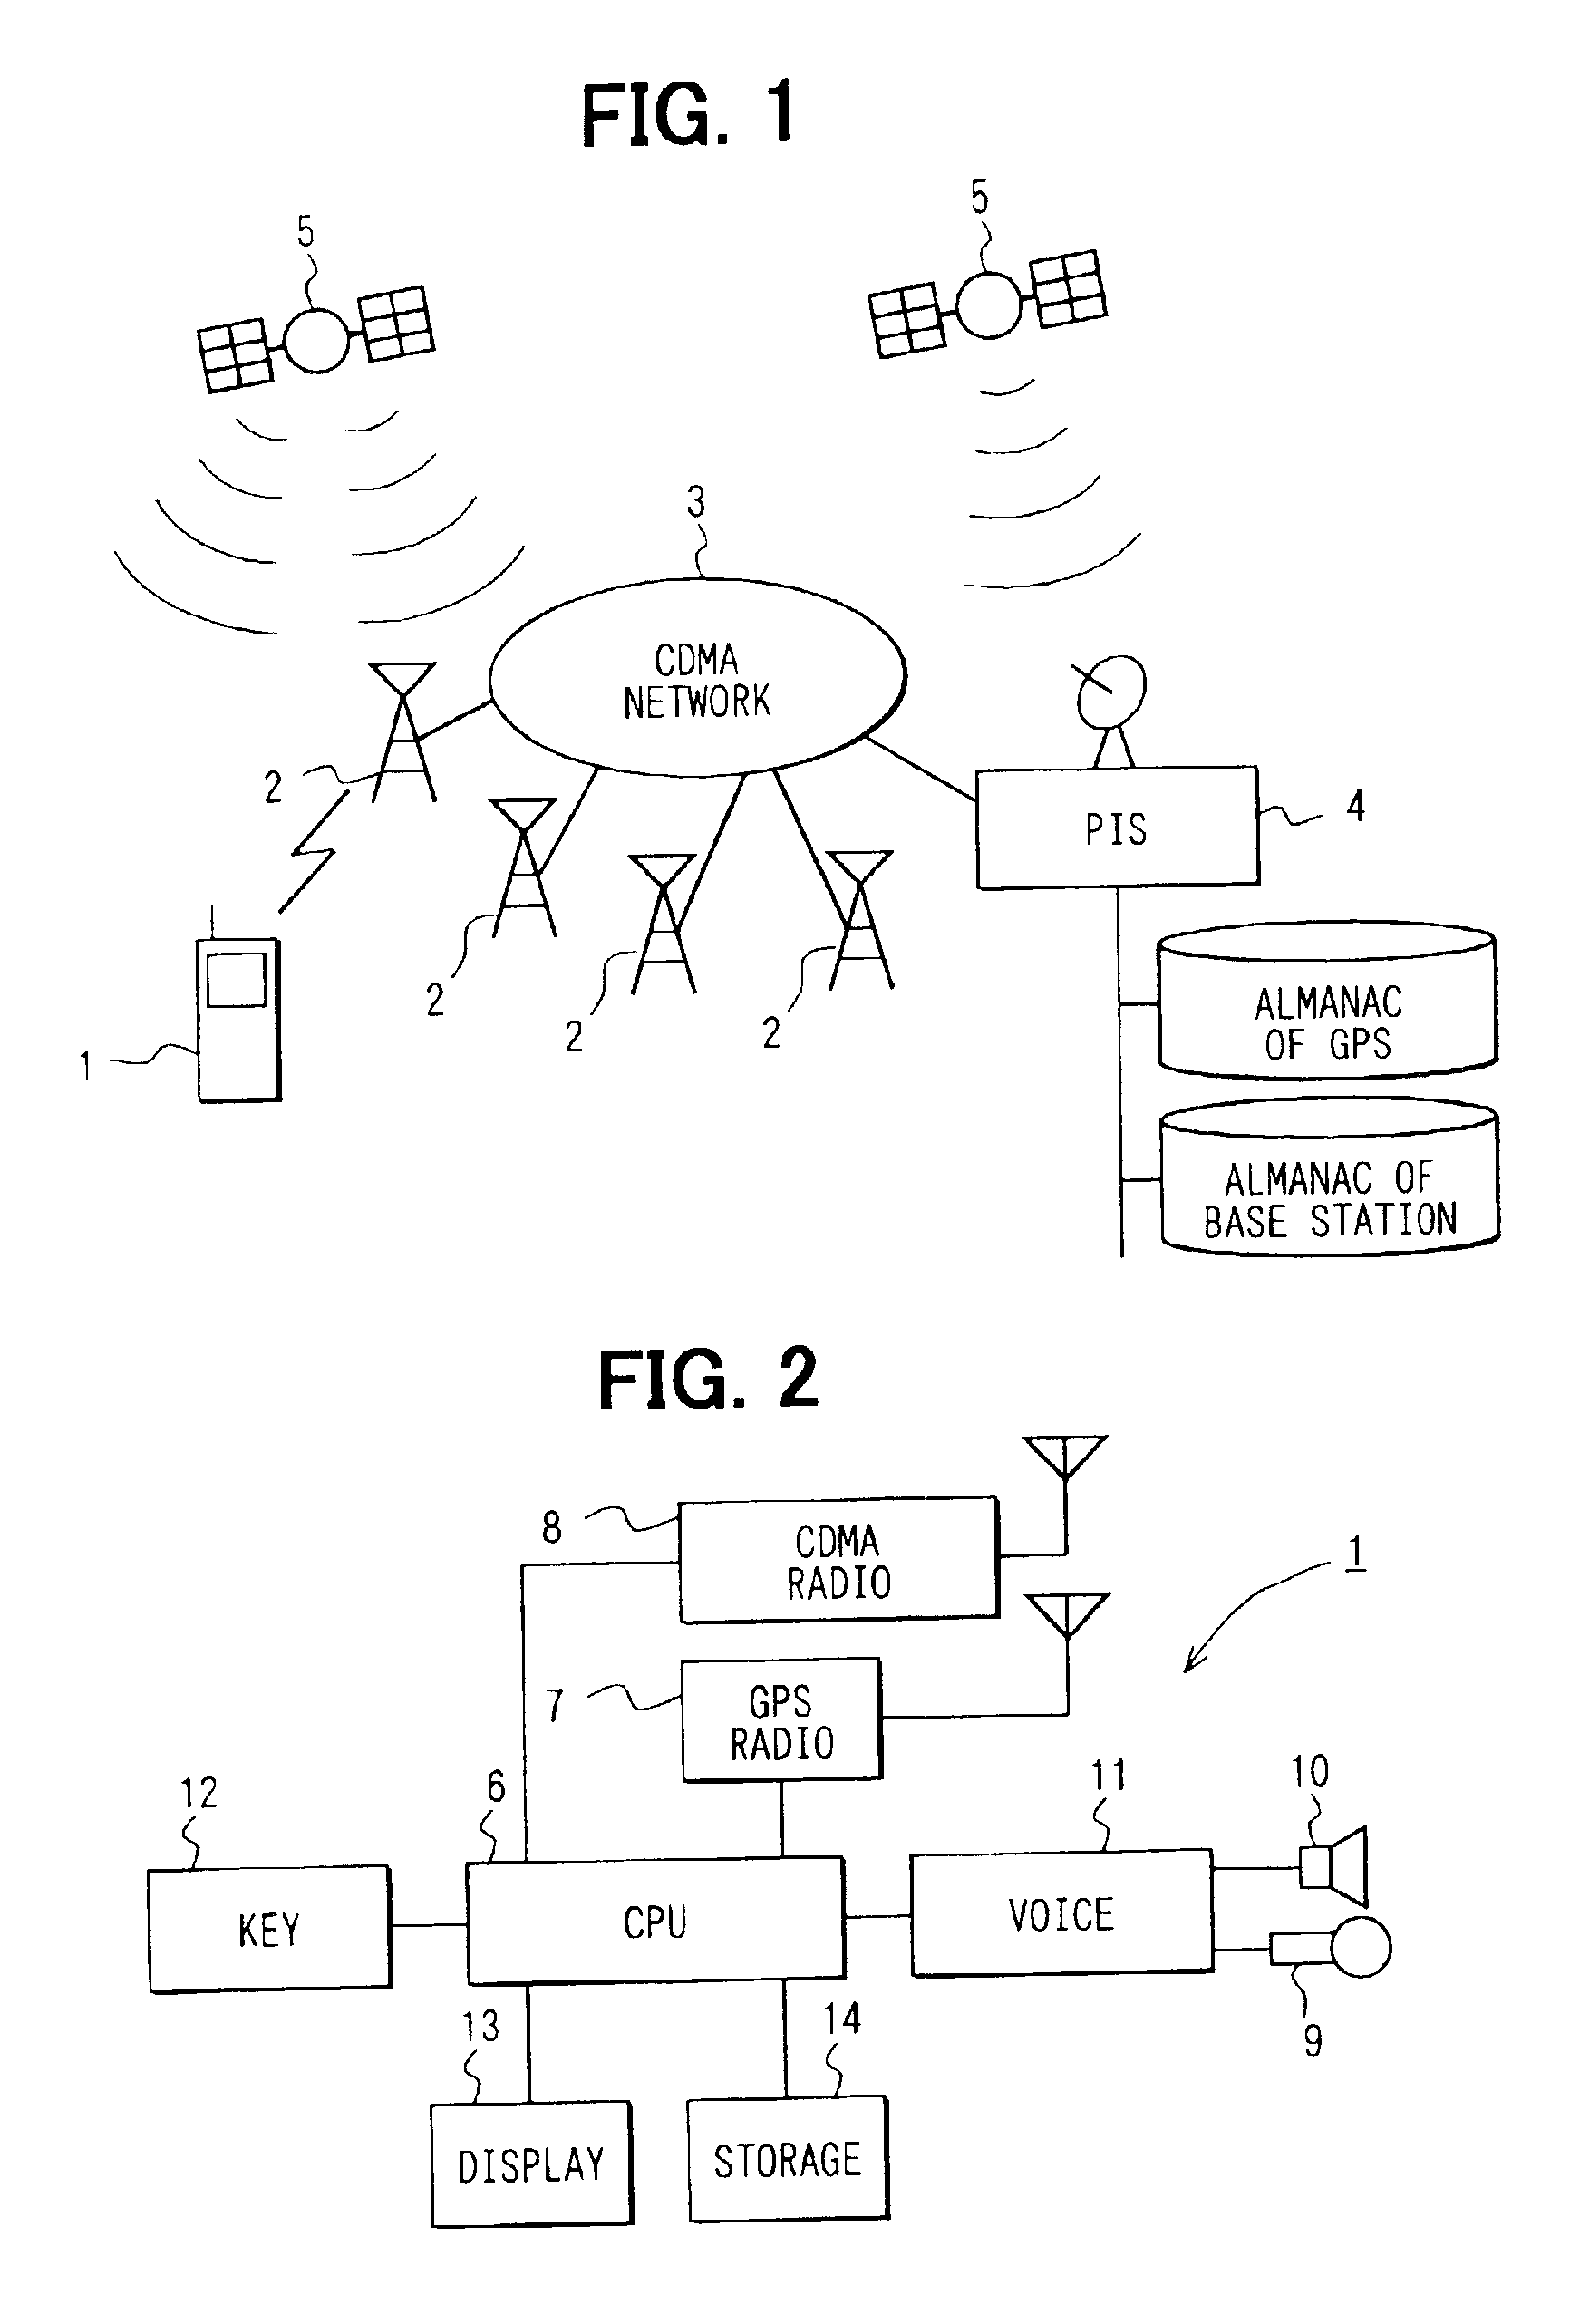 Radio communication terminal and position specifying system